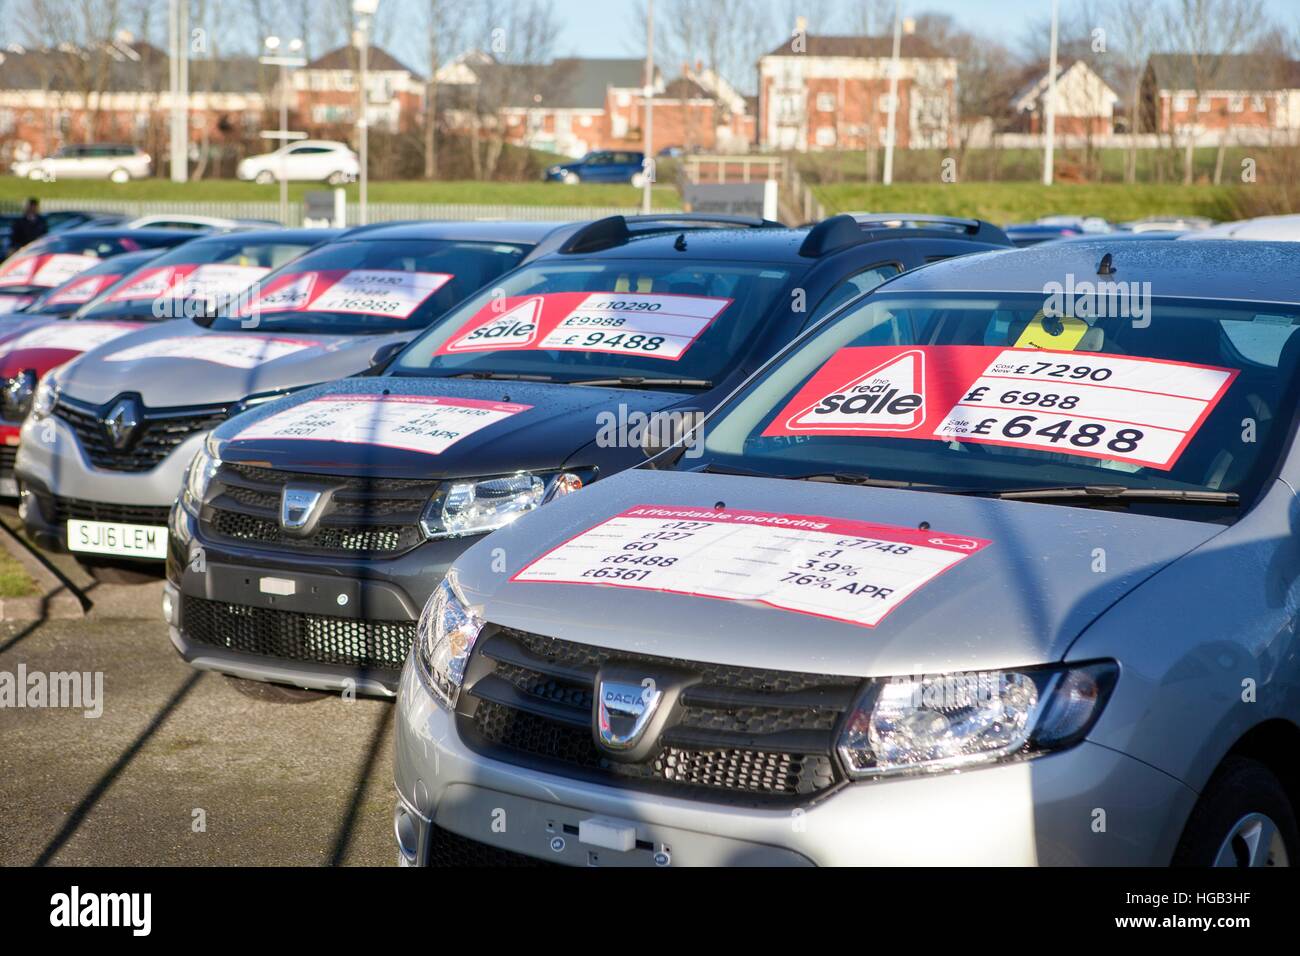 Dacia Discounted vehicles, second hand saloon cars lined up on used car garage forecourt with APR 'real sale' deal stickers, Preston, Lancashire, UK. Stock Photo